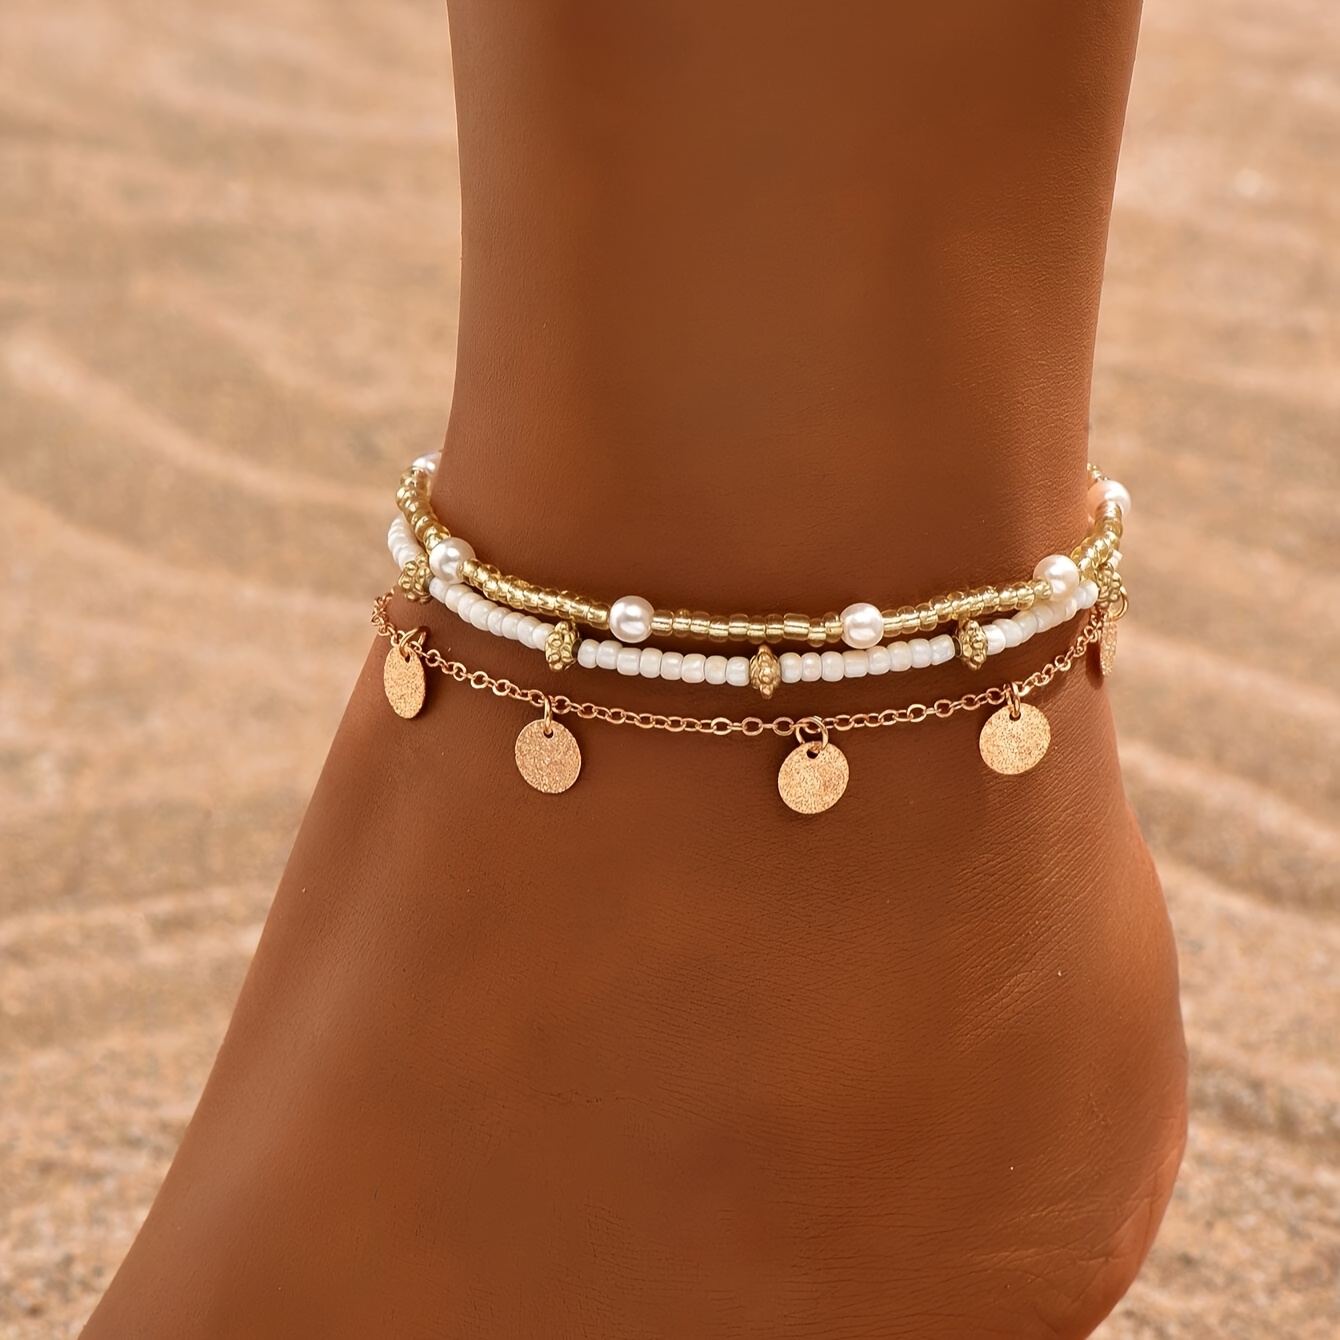 

3pcs/set, Vintage & Boho Style, Golden Sequin Anklet, Match White Glass Rice Bead Anklet, Fashion Delicate Accessory For Holiday & Party, Idea Gift For Ladies